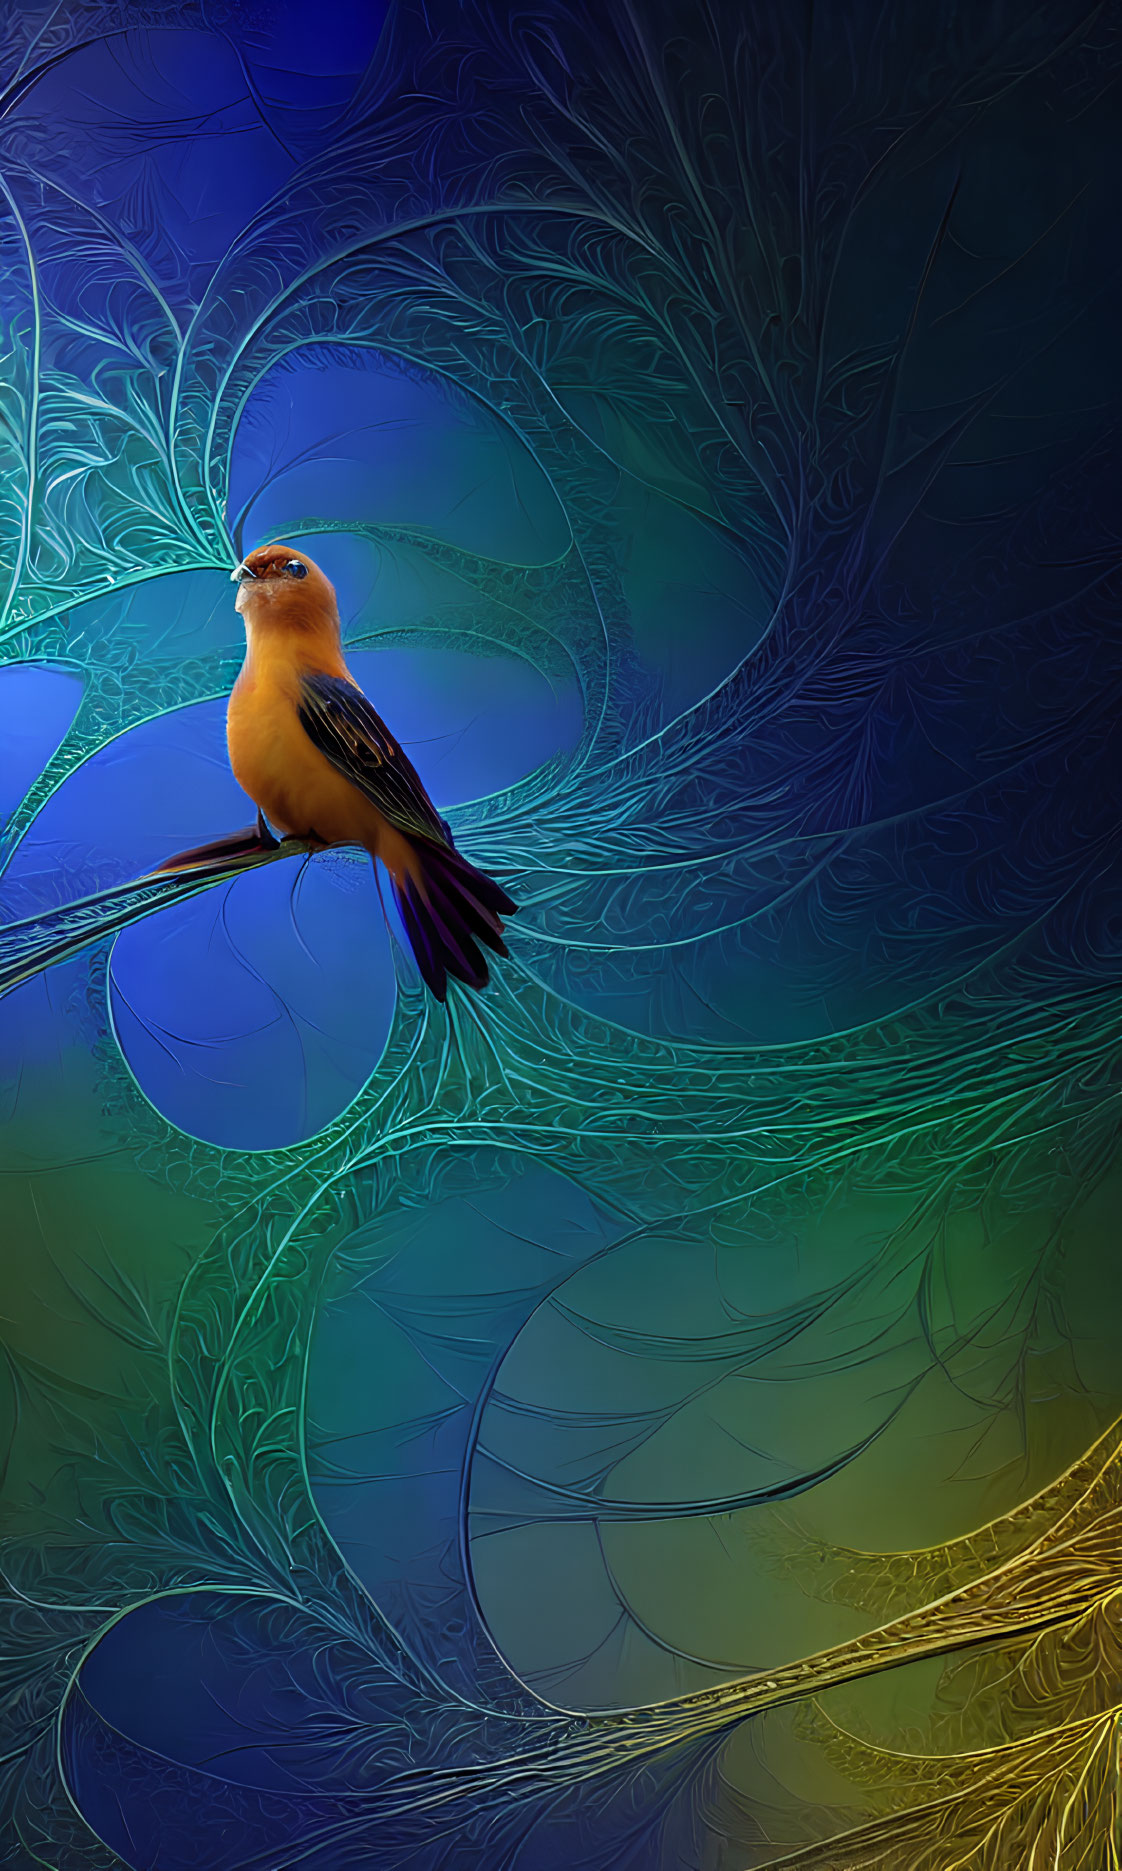 Bird perched on swirl in vibrant blue and green fractal pattern.